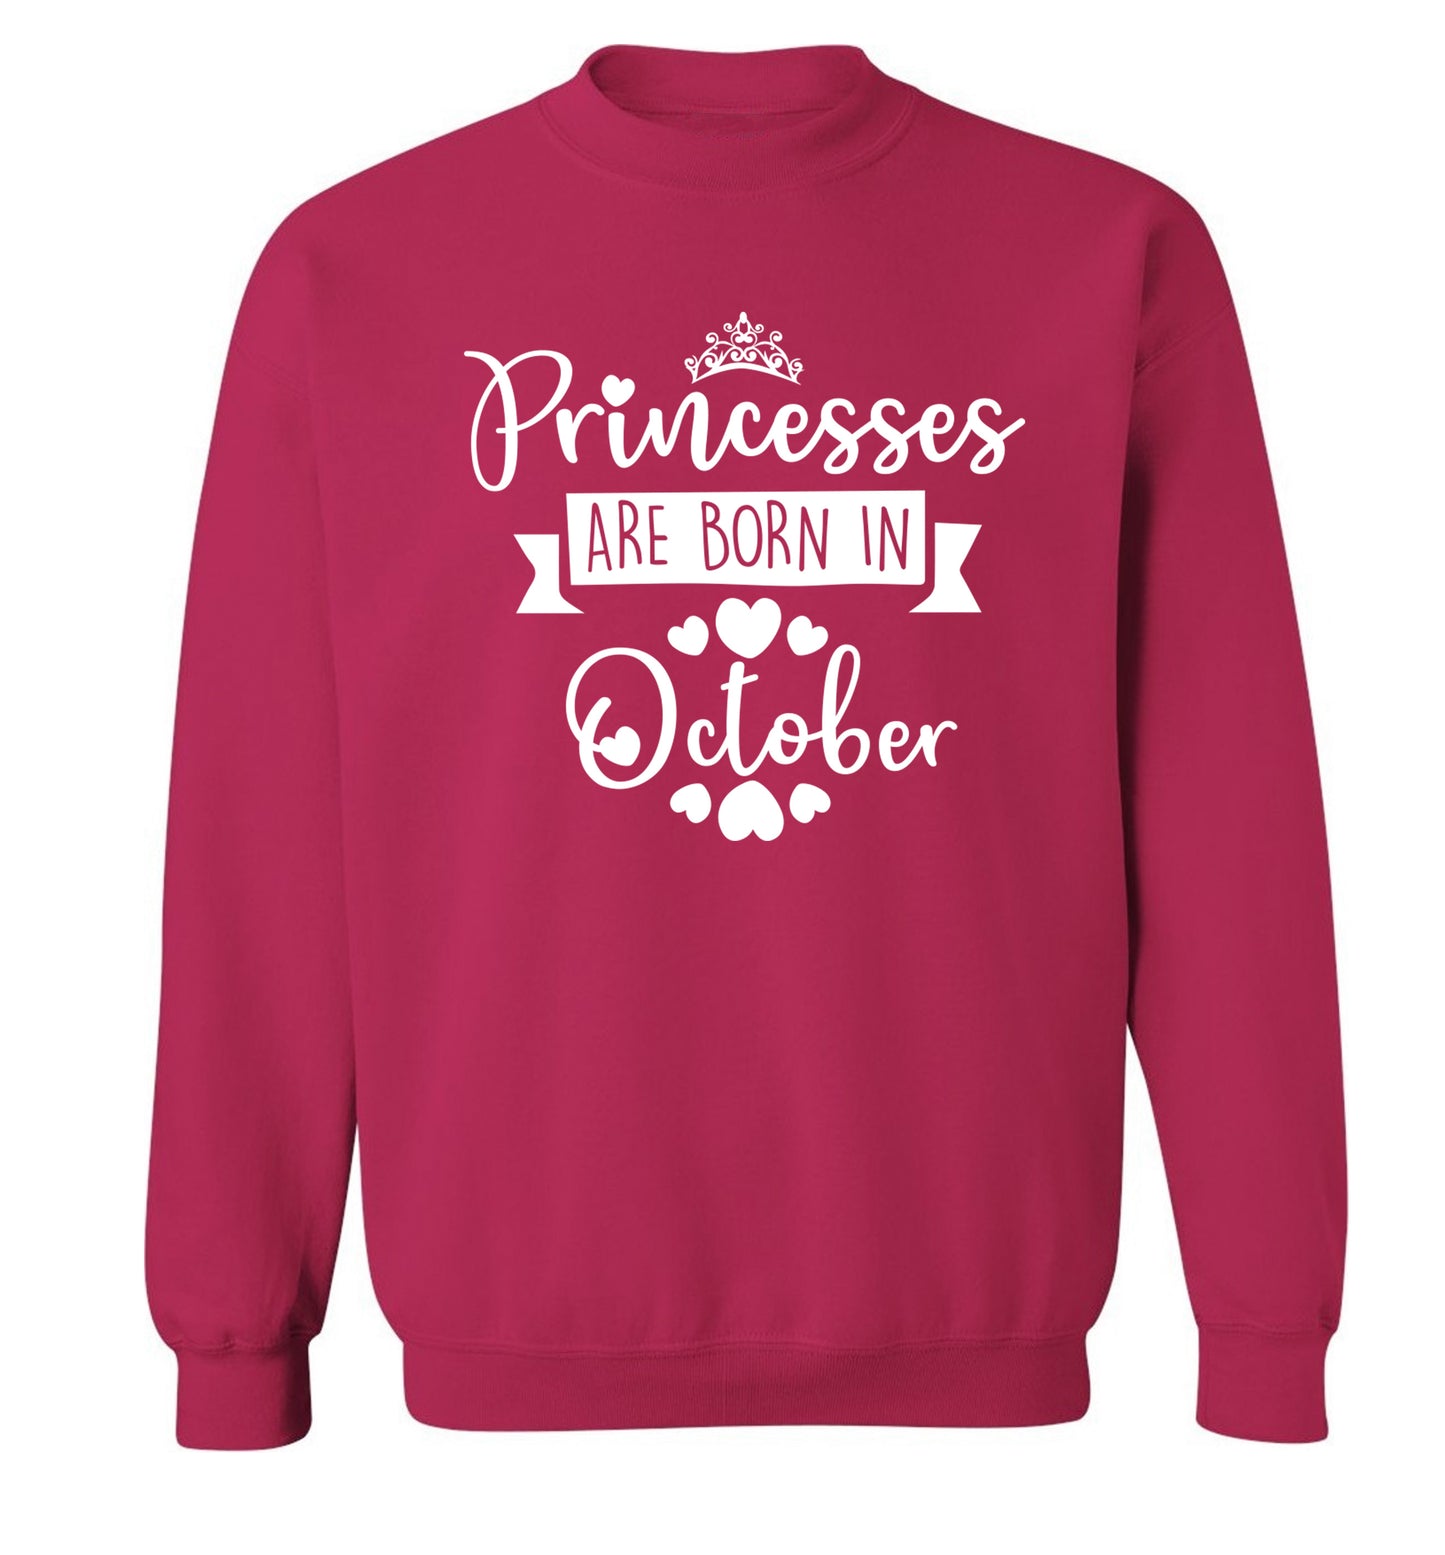 Princesses are born in October Adult's unisex pink Sweater 2XL